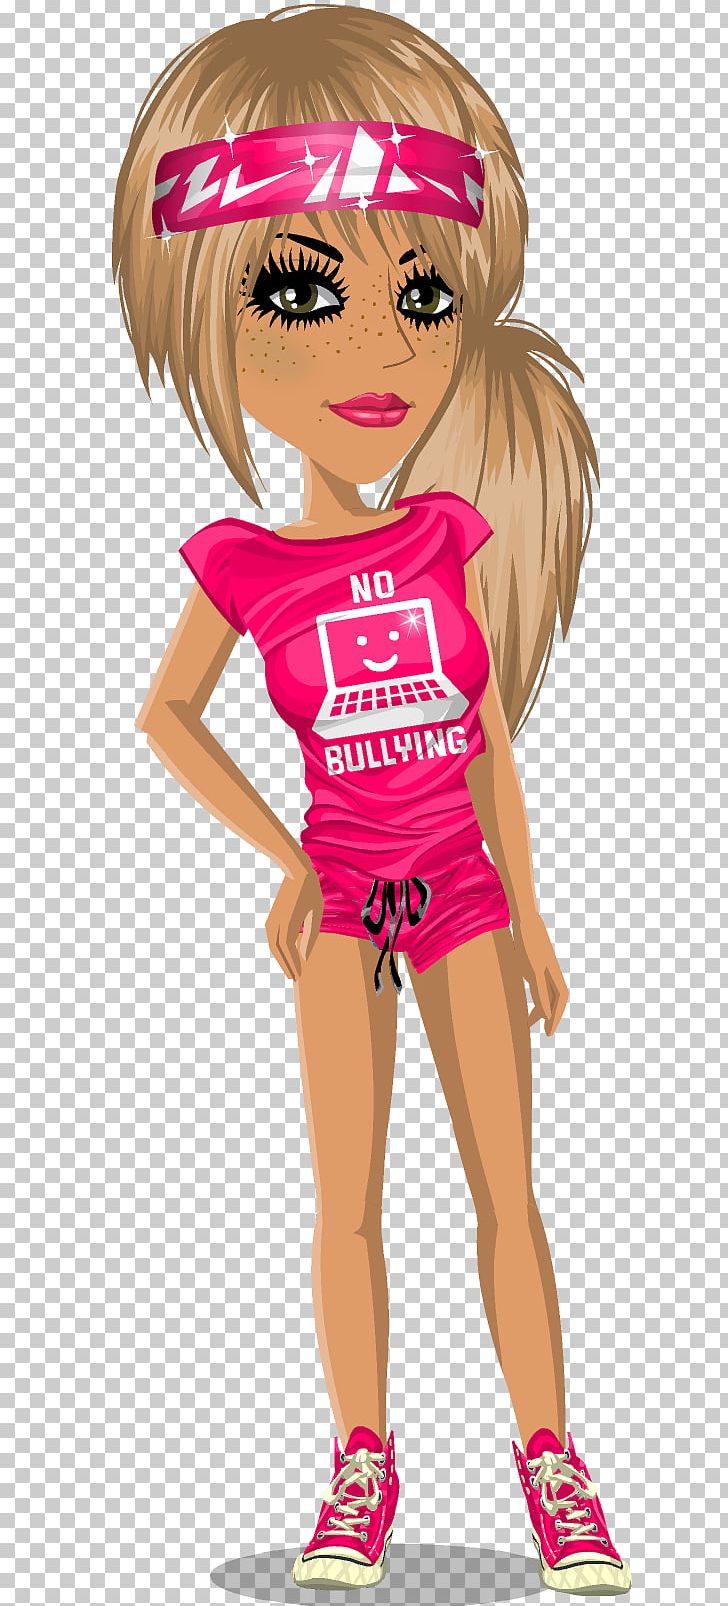 MovieStarPlanet Android Desktop PNG, Clipart, Android, Anime, Arm, Avatar, Barbie Free PNG Download